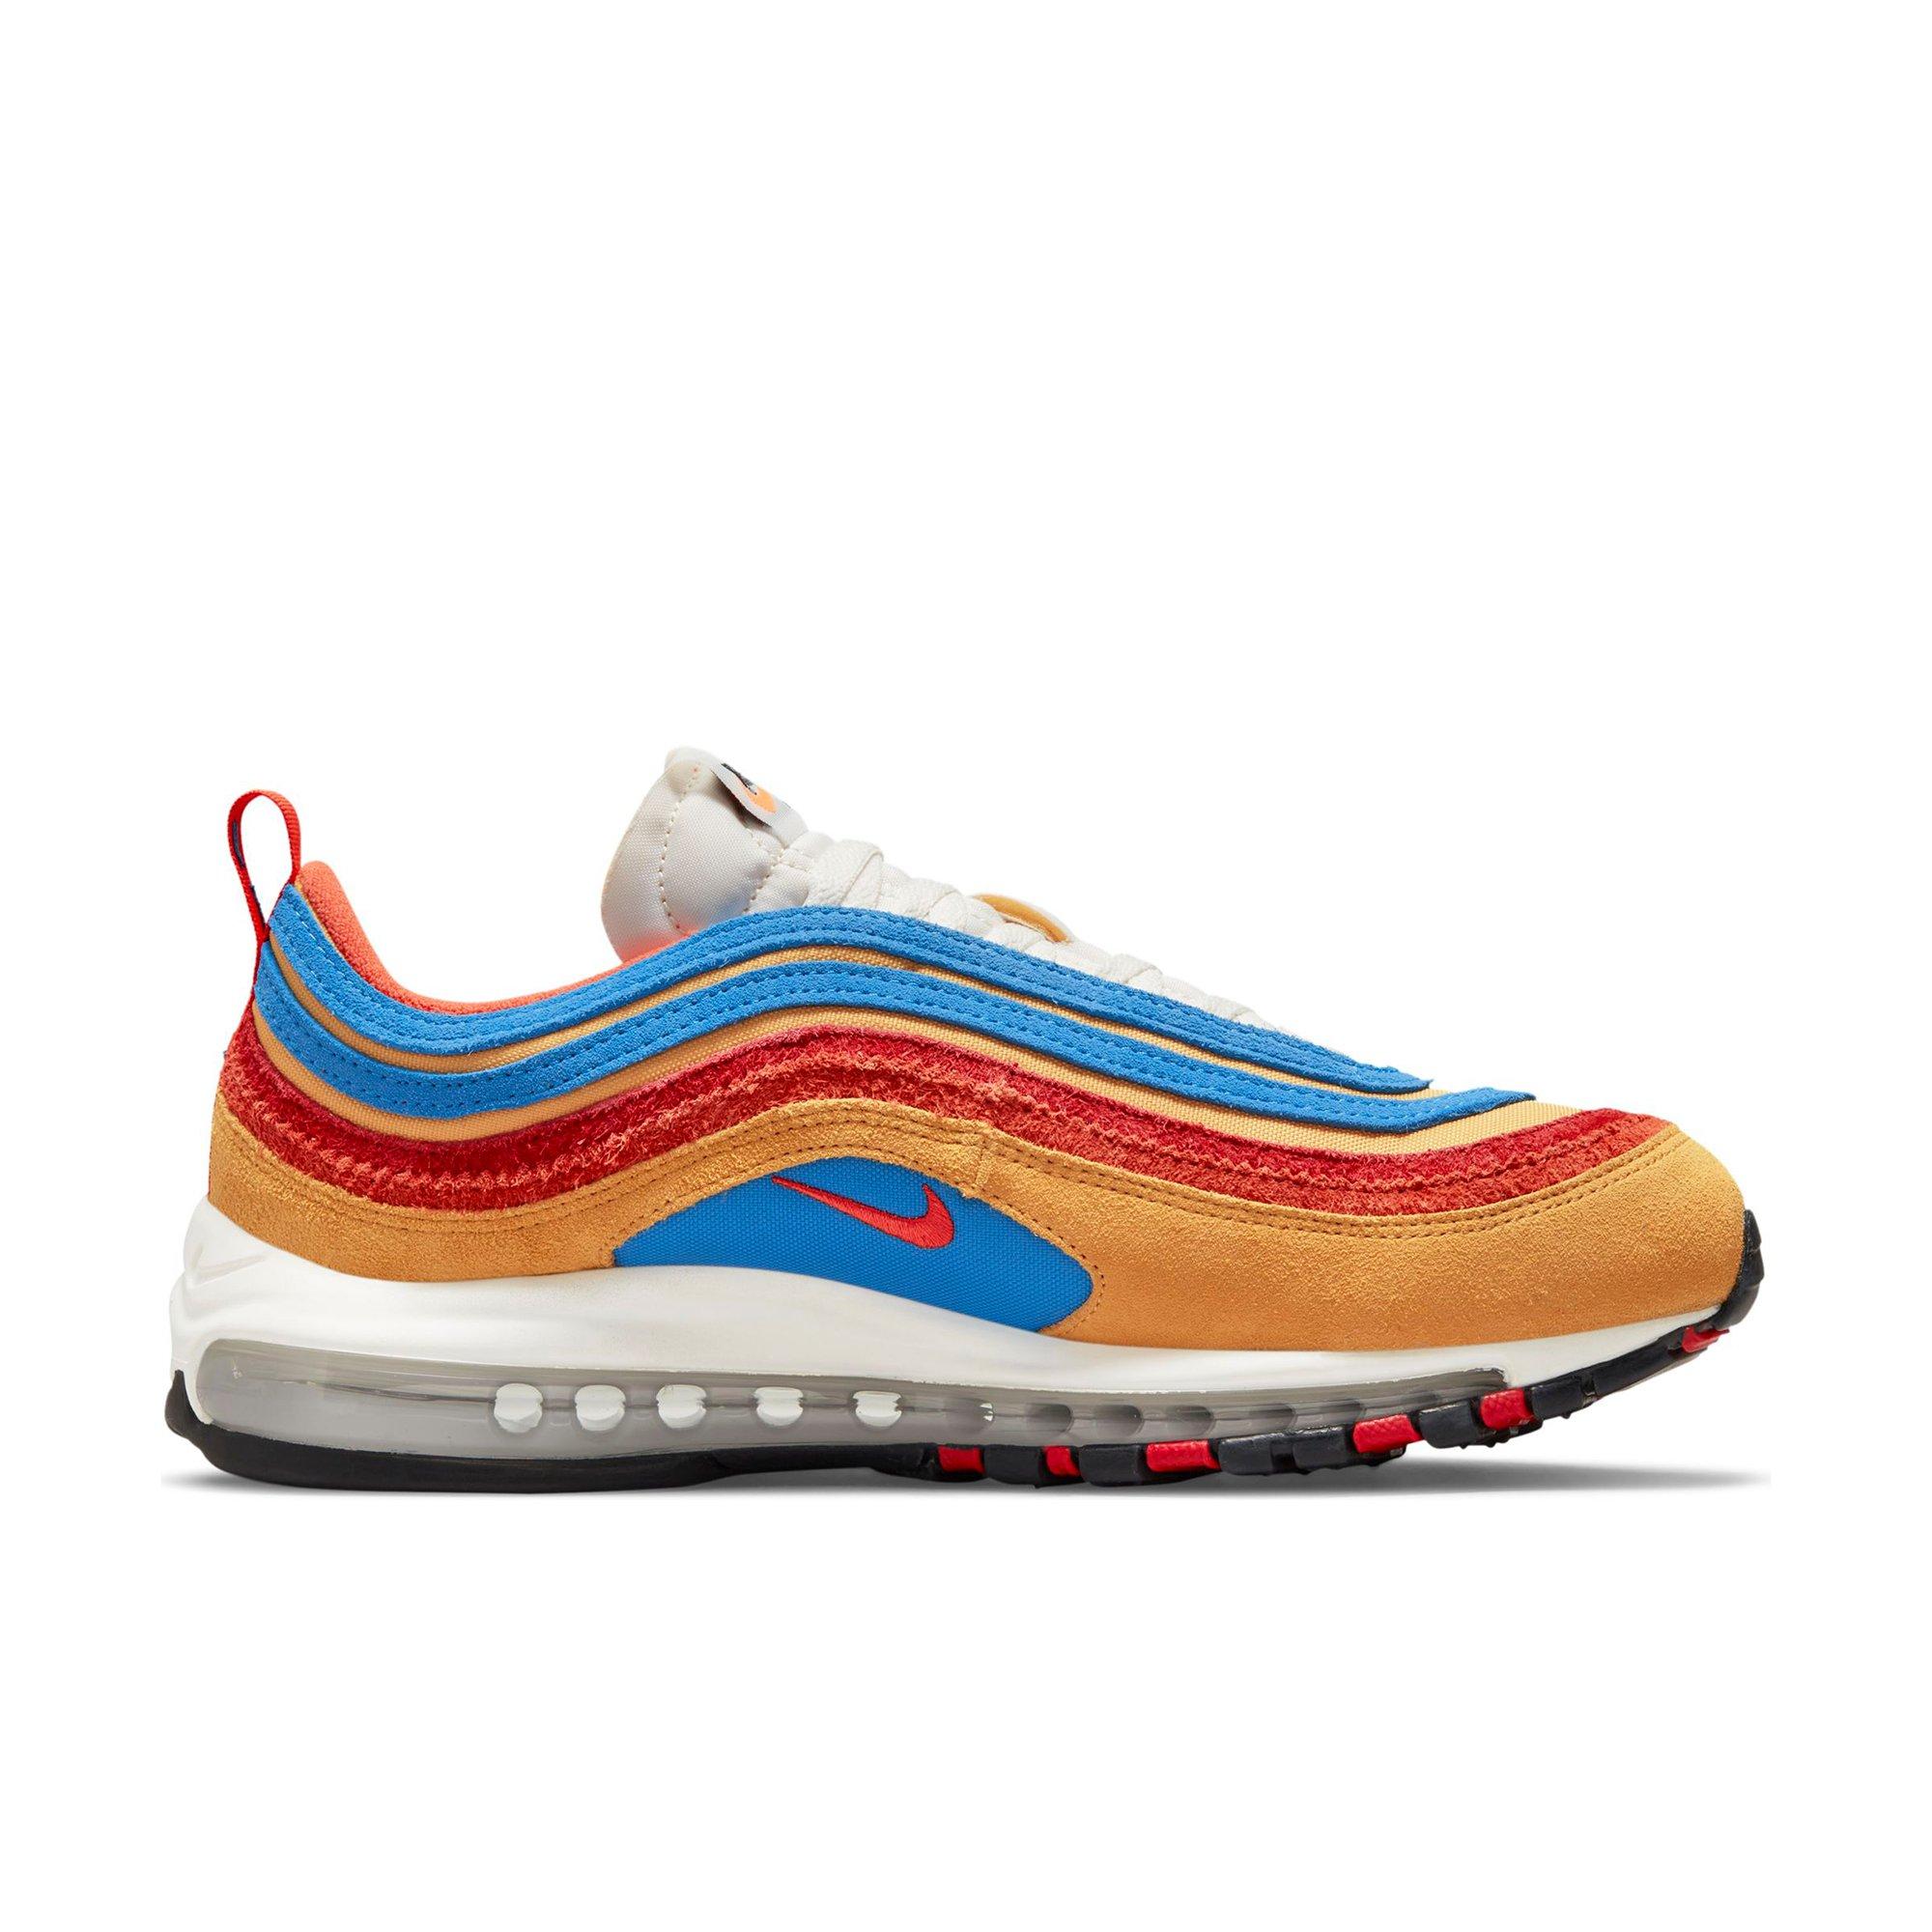 red white and blue 97 air max